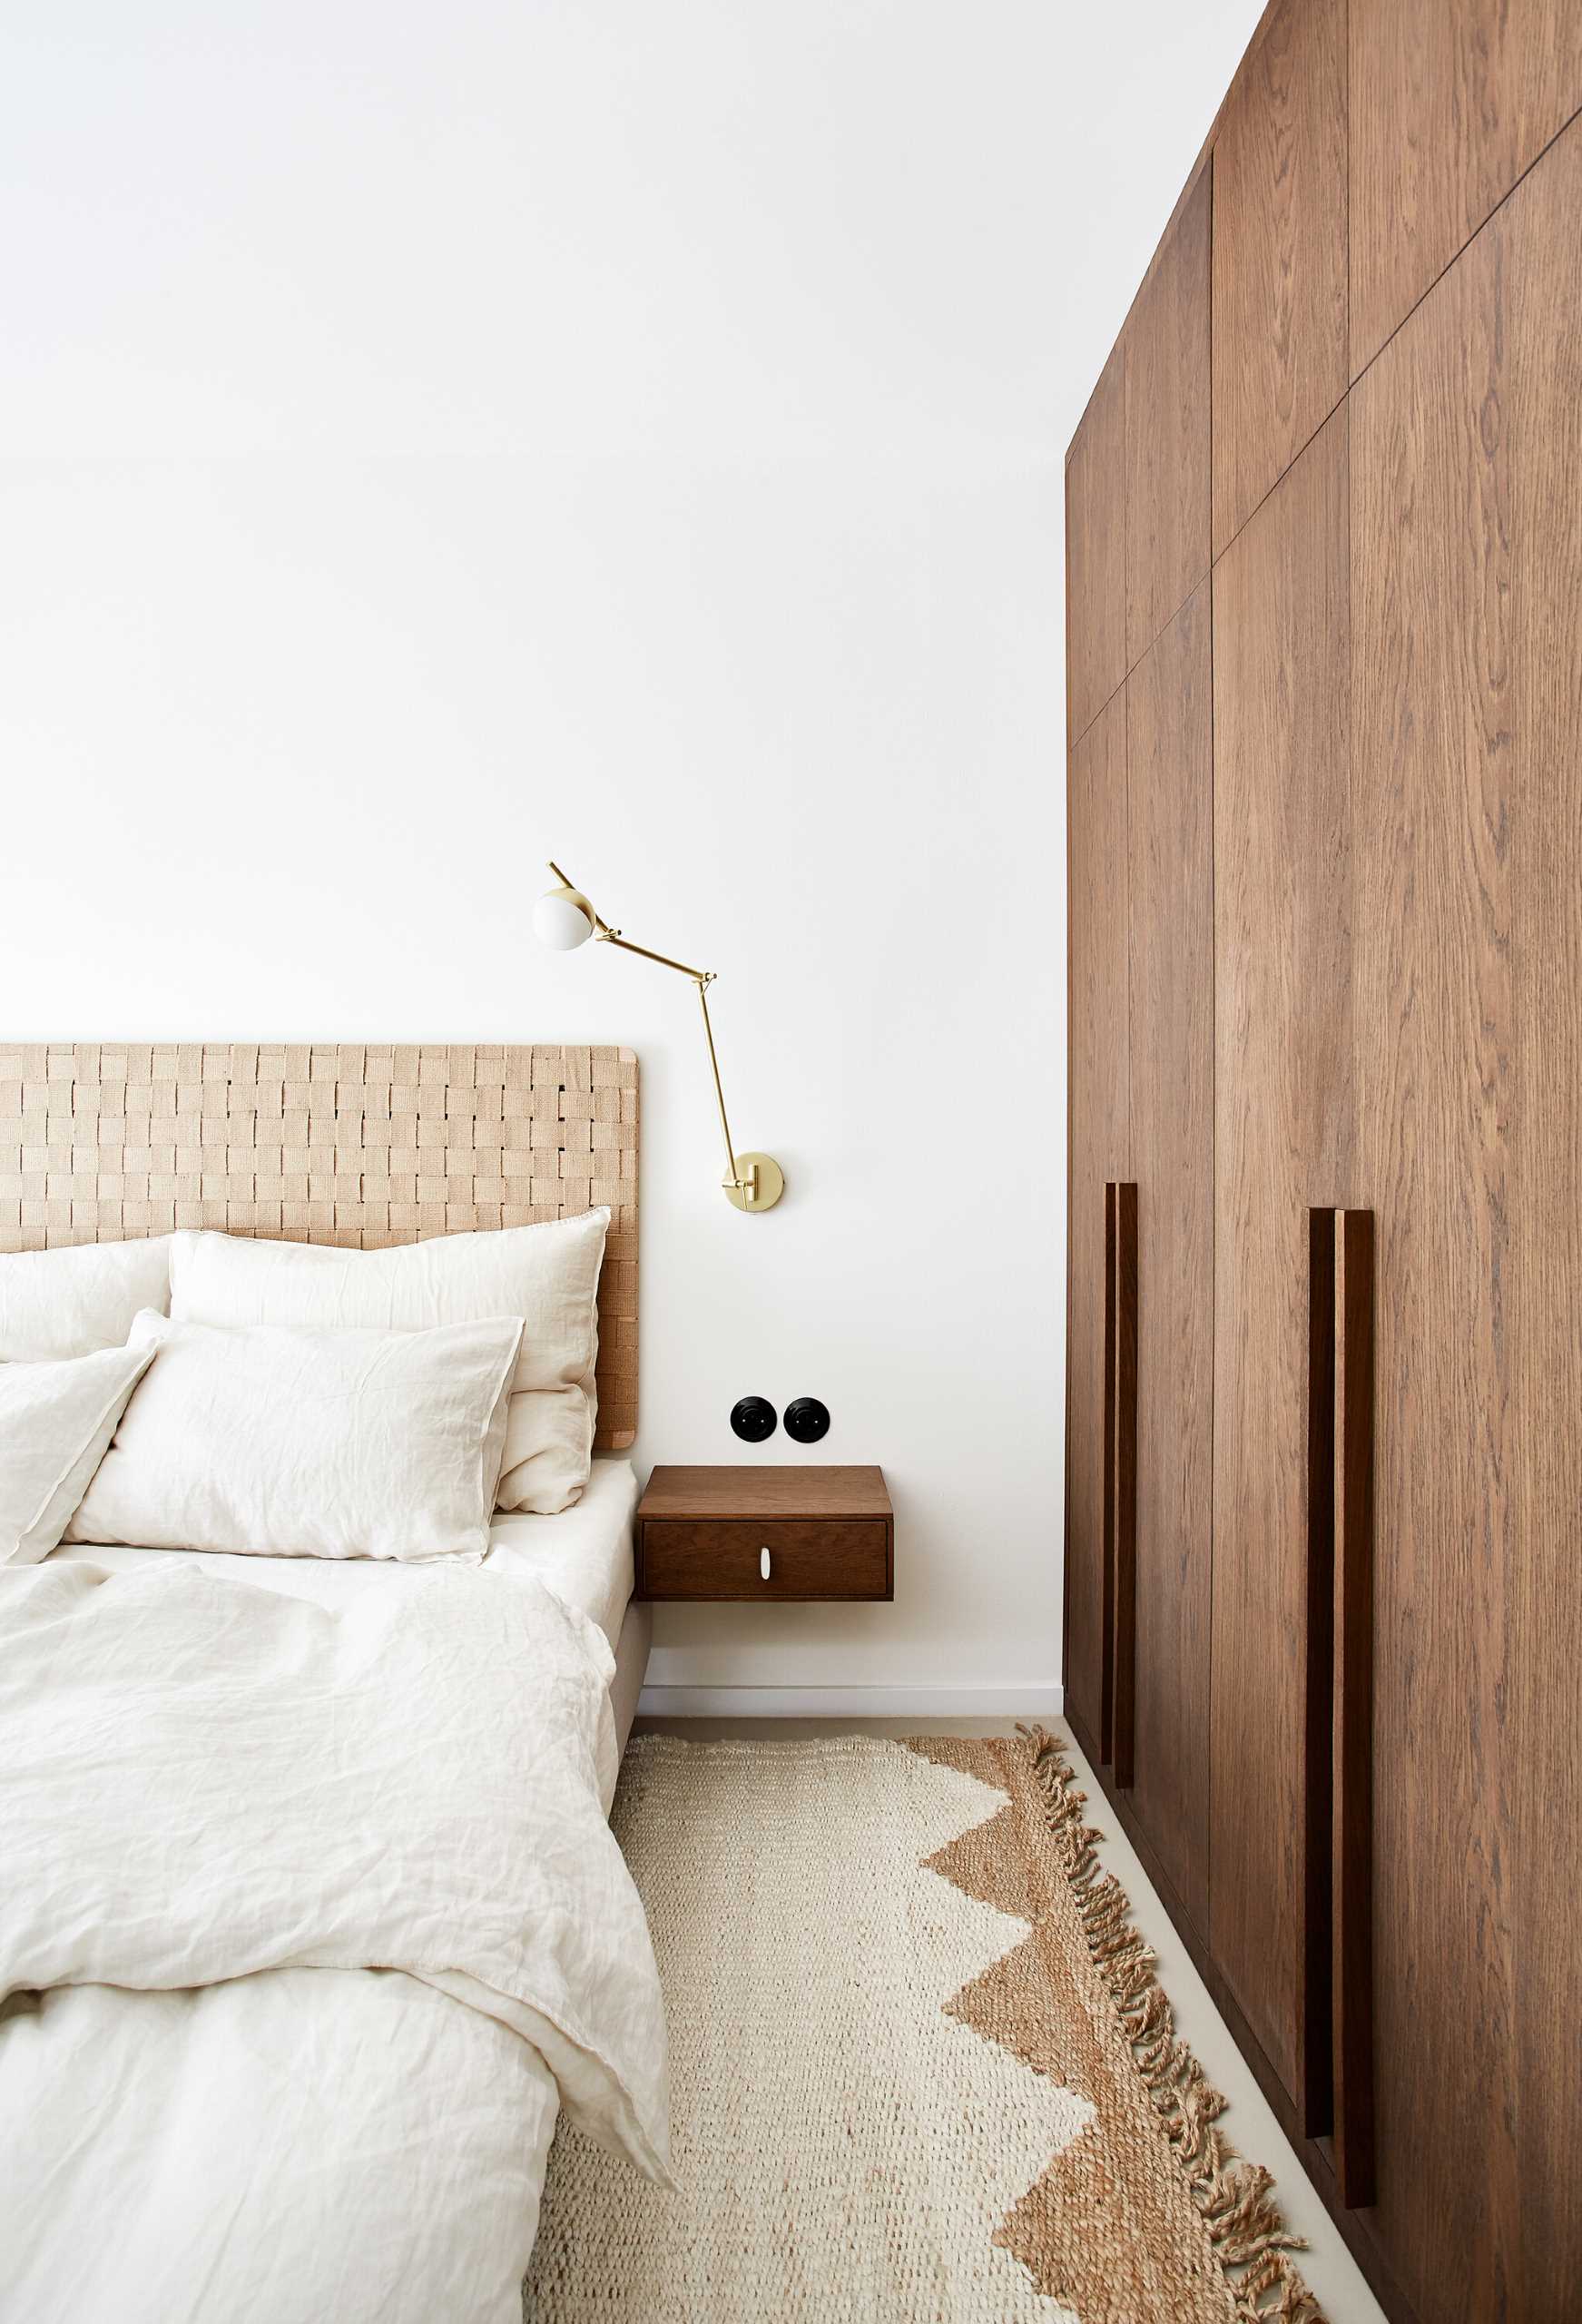 In this modern bedroom, neutral colors and natural materials create a calm atmosphere.